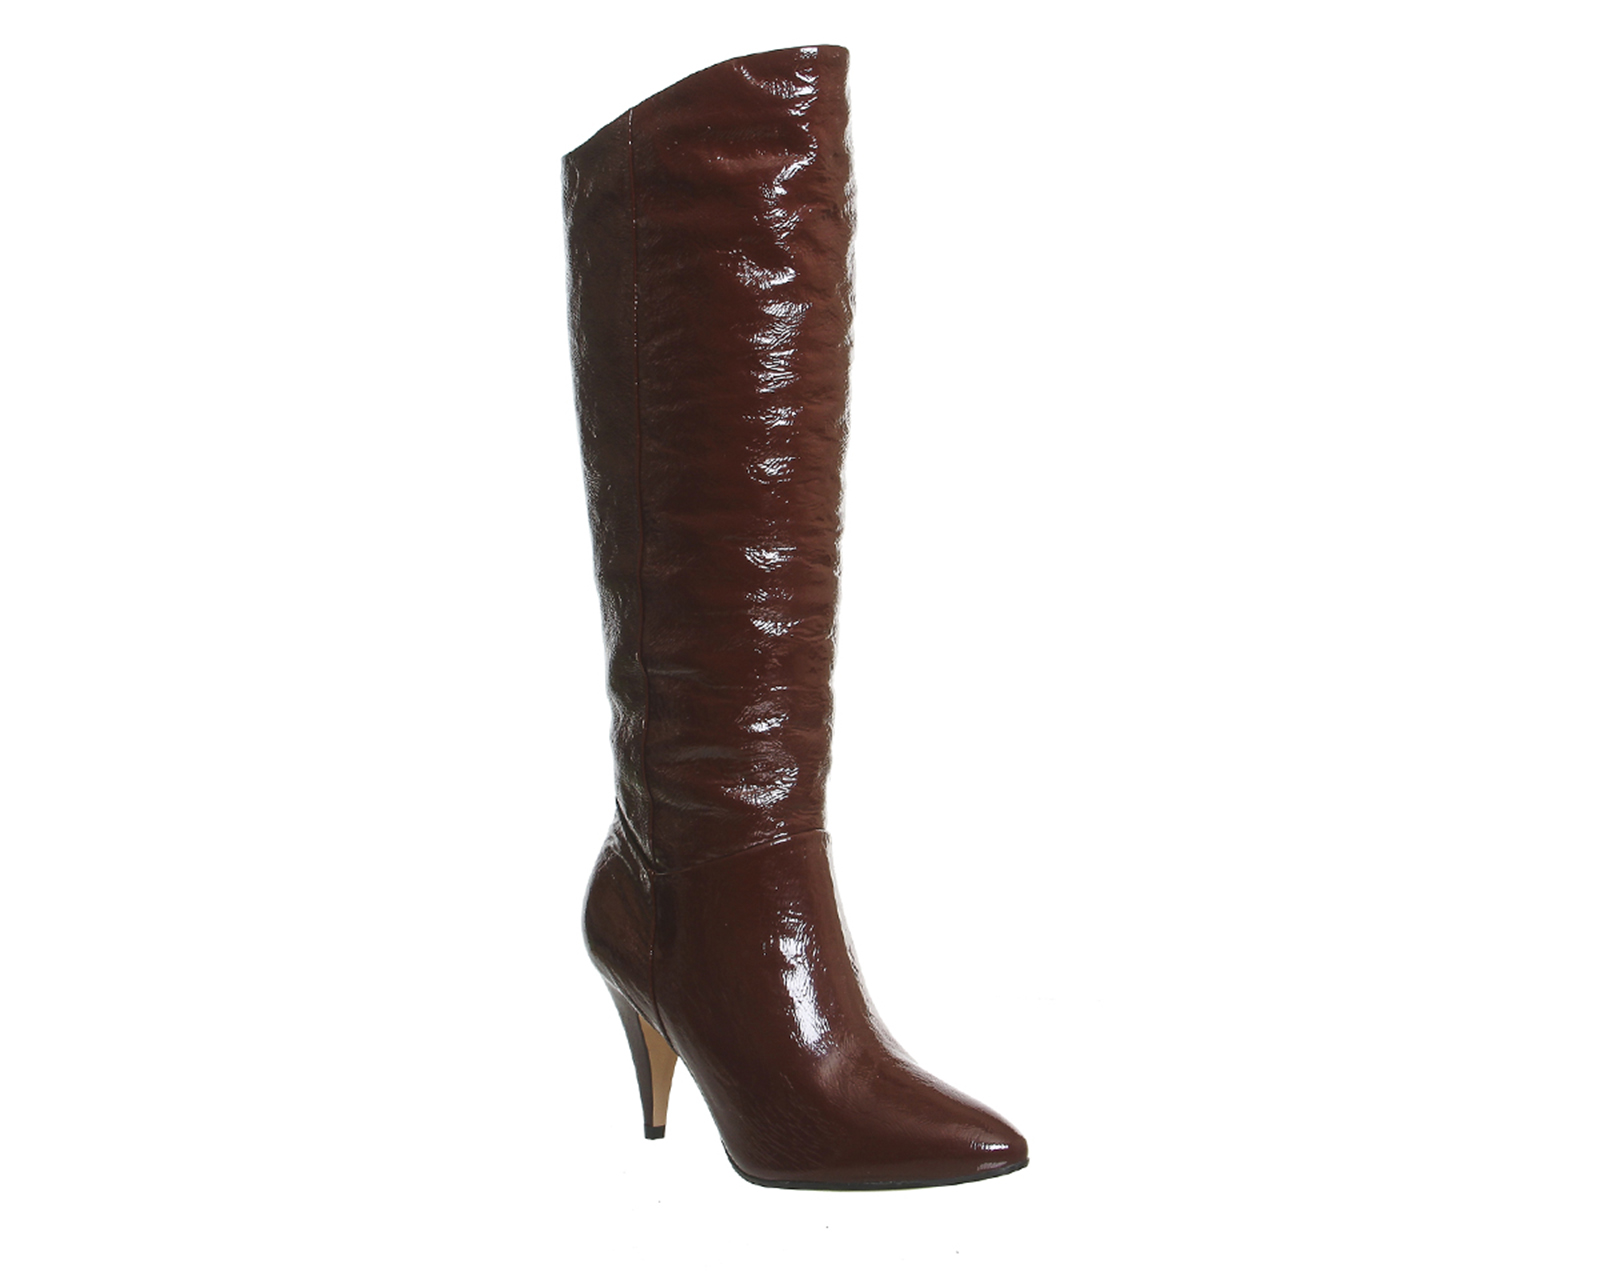 OFFICEKiss Slouch Knee BootsBurgundy Patent Leather